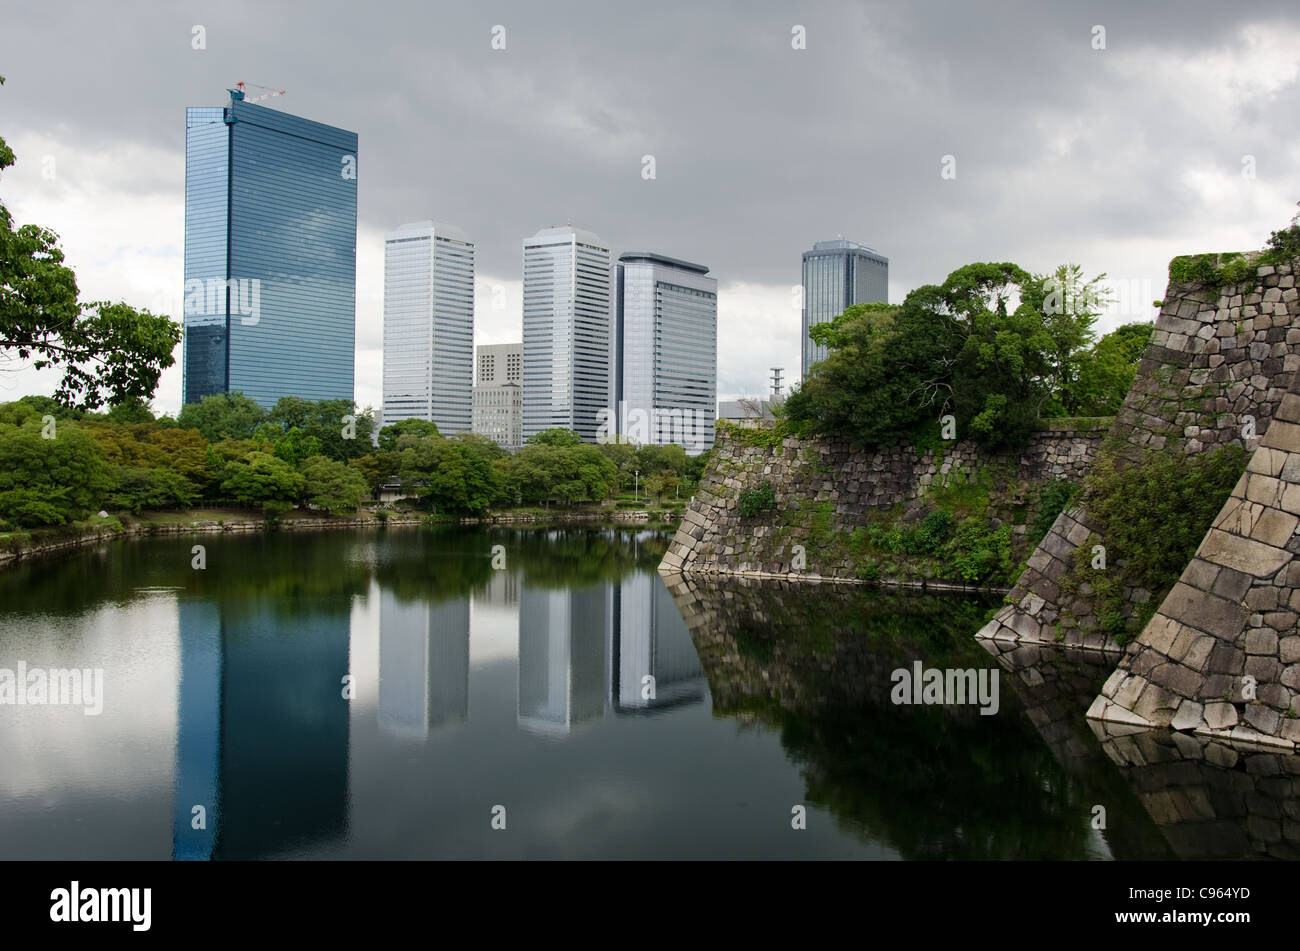 The Skyline of Osaka Business Park with the fortification walls of Osaka castle in the foreground Stock Photo